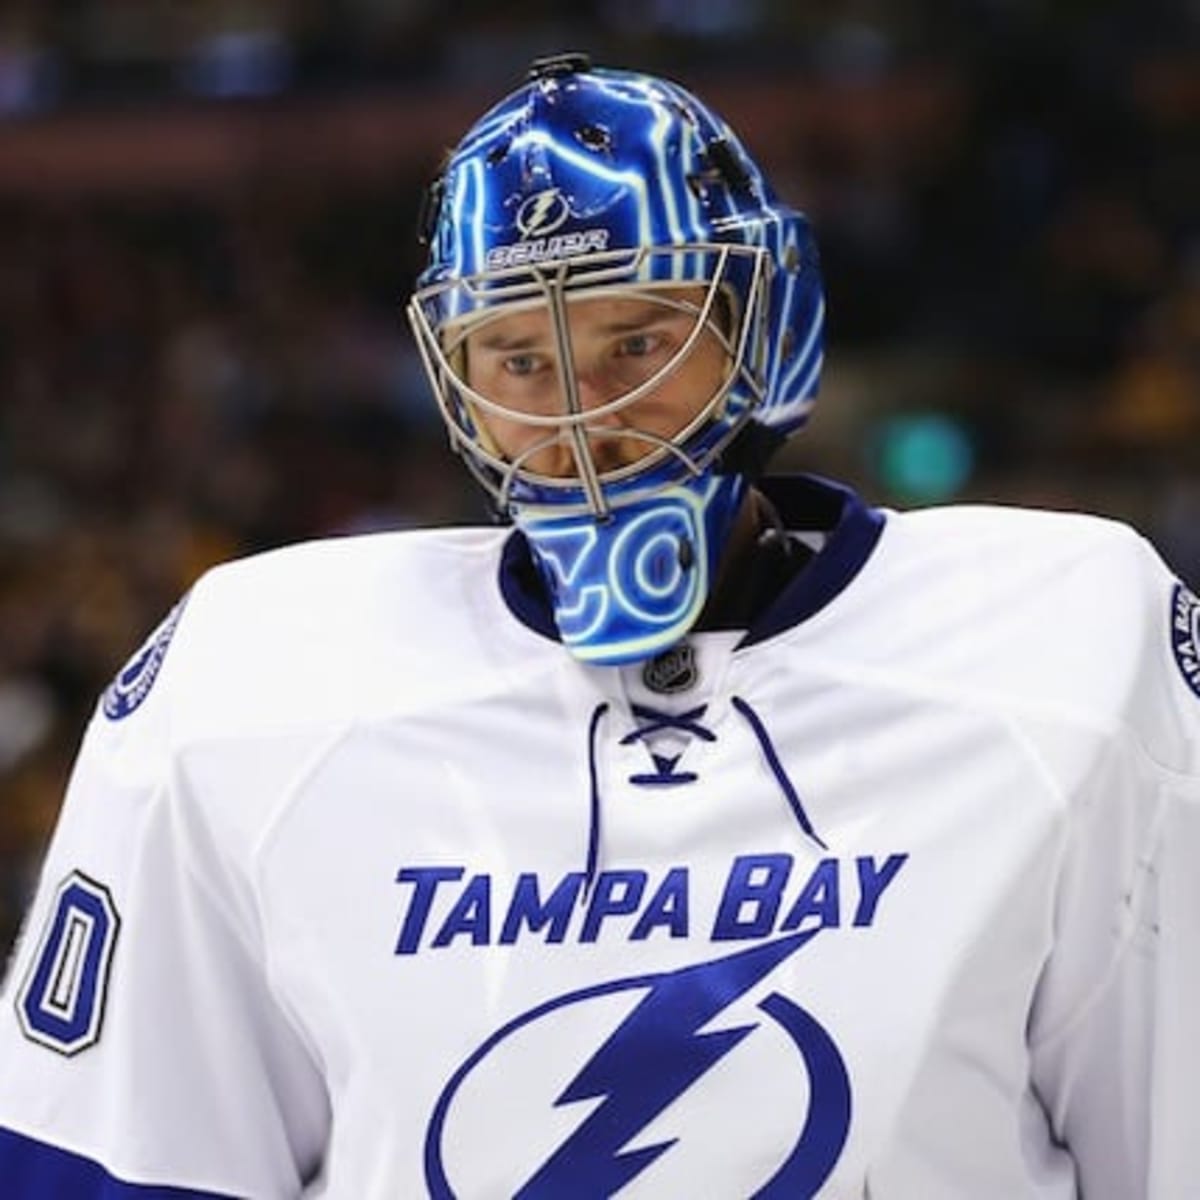 Here's hoping Ben Bishop gets the farewell he deserves in Tampa Bay